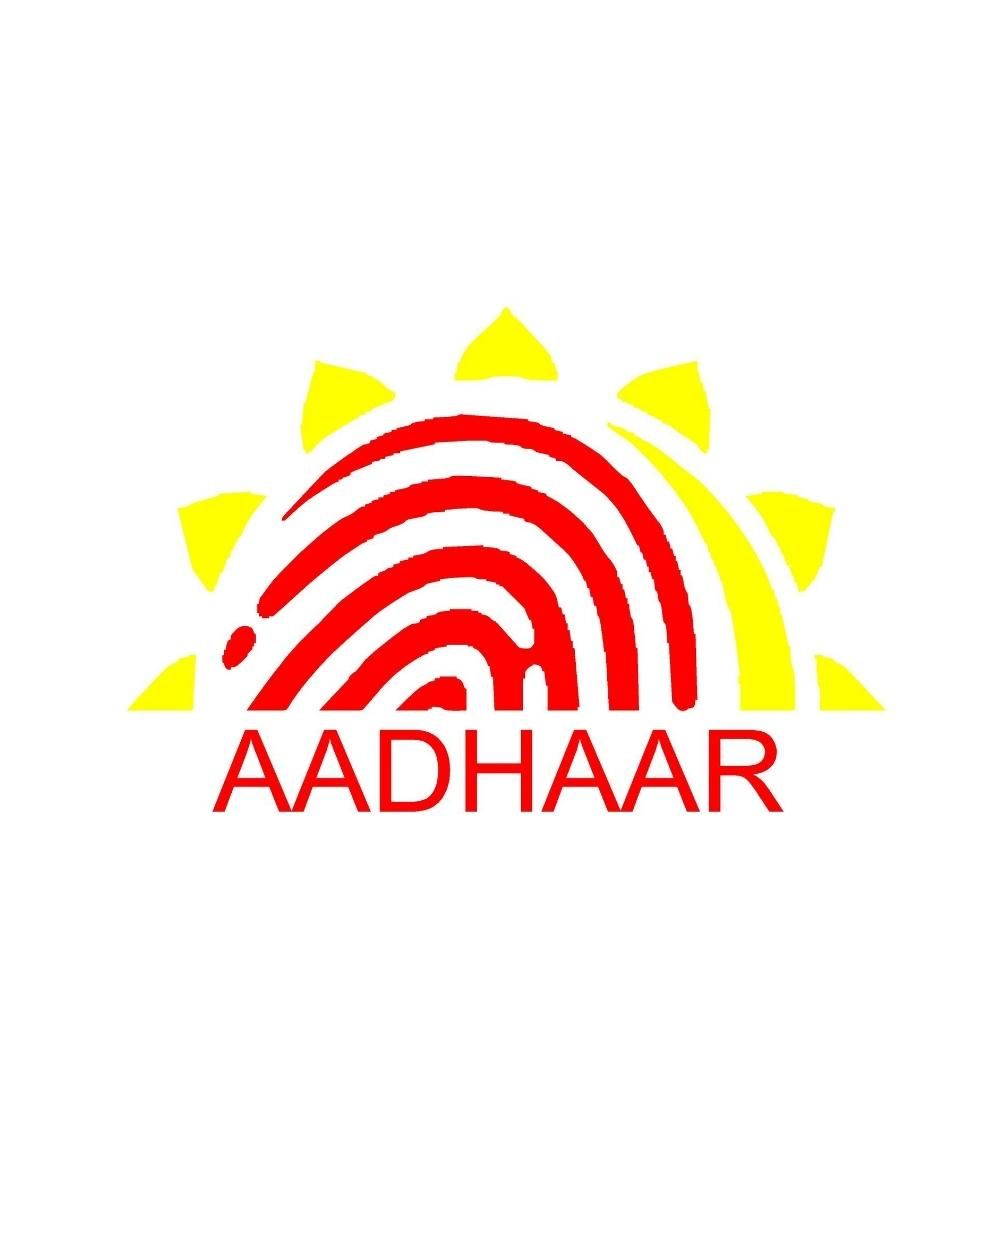 The Aadhaar journey: From flagship Cong project to cornerstone of BJP's  'Digital India' | Political Pulse News - The Indian Express